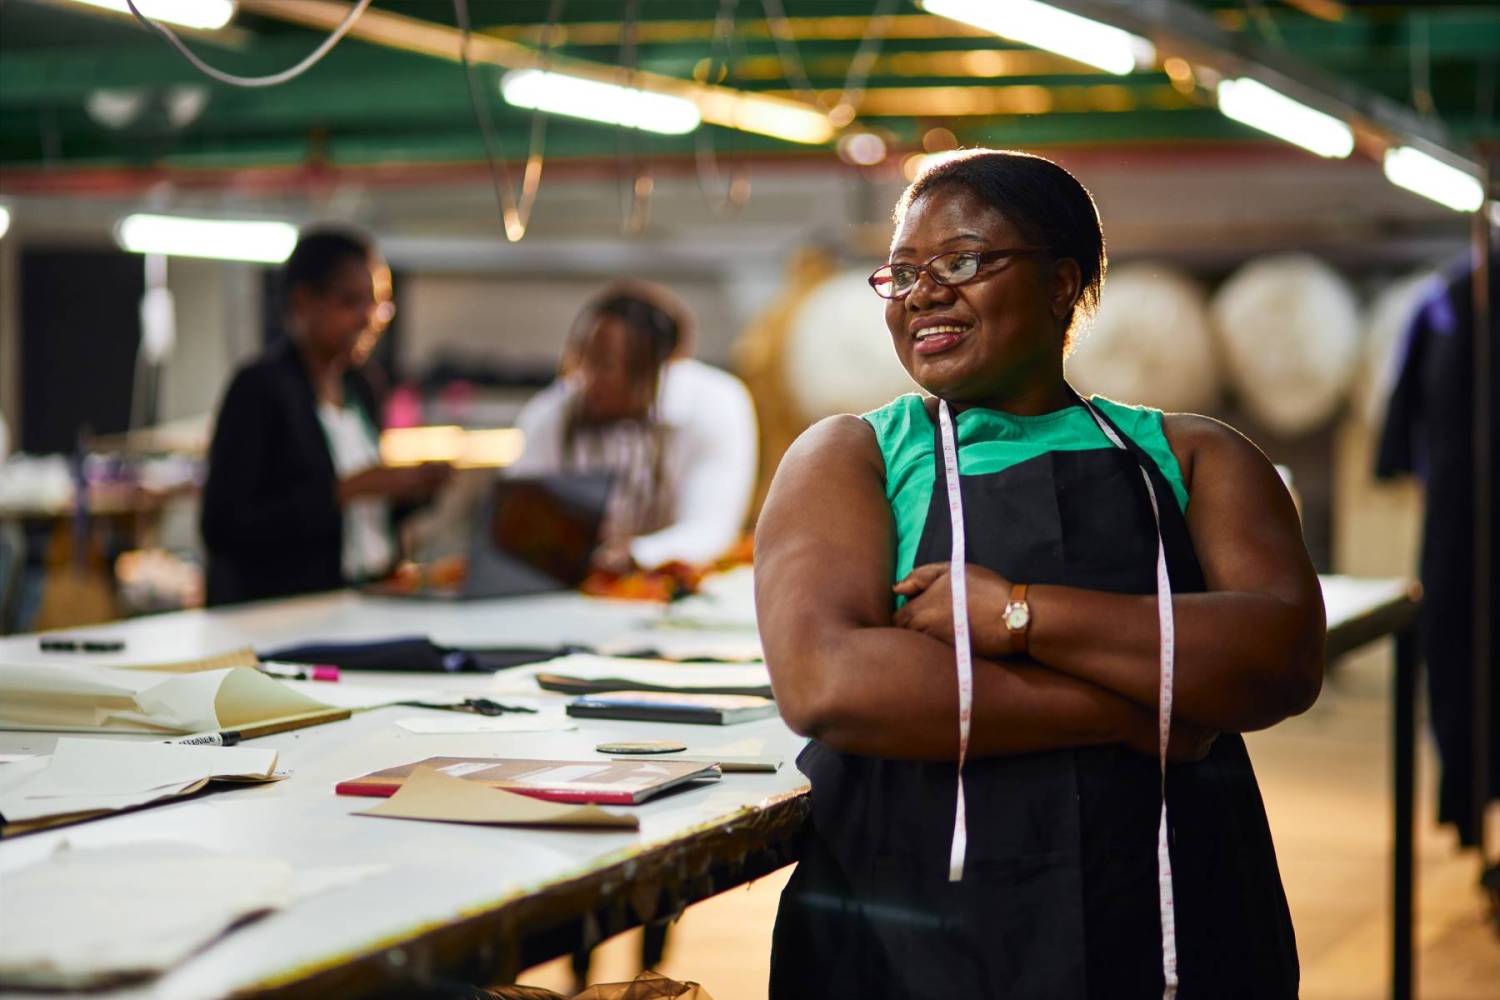 A young African woman stands with her arms folded in a textile workshop. (Photo credit: Magnifical Productions / Shutterstock)